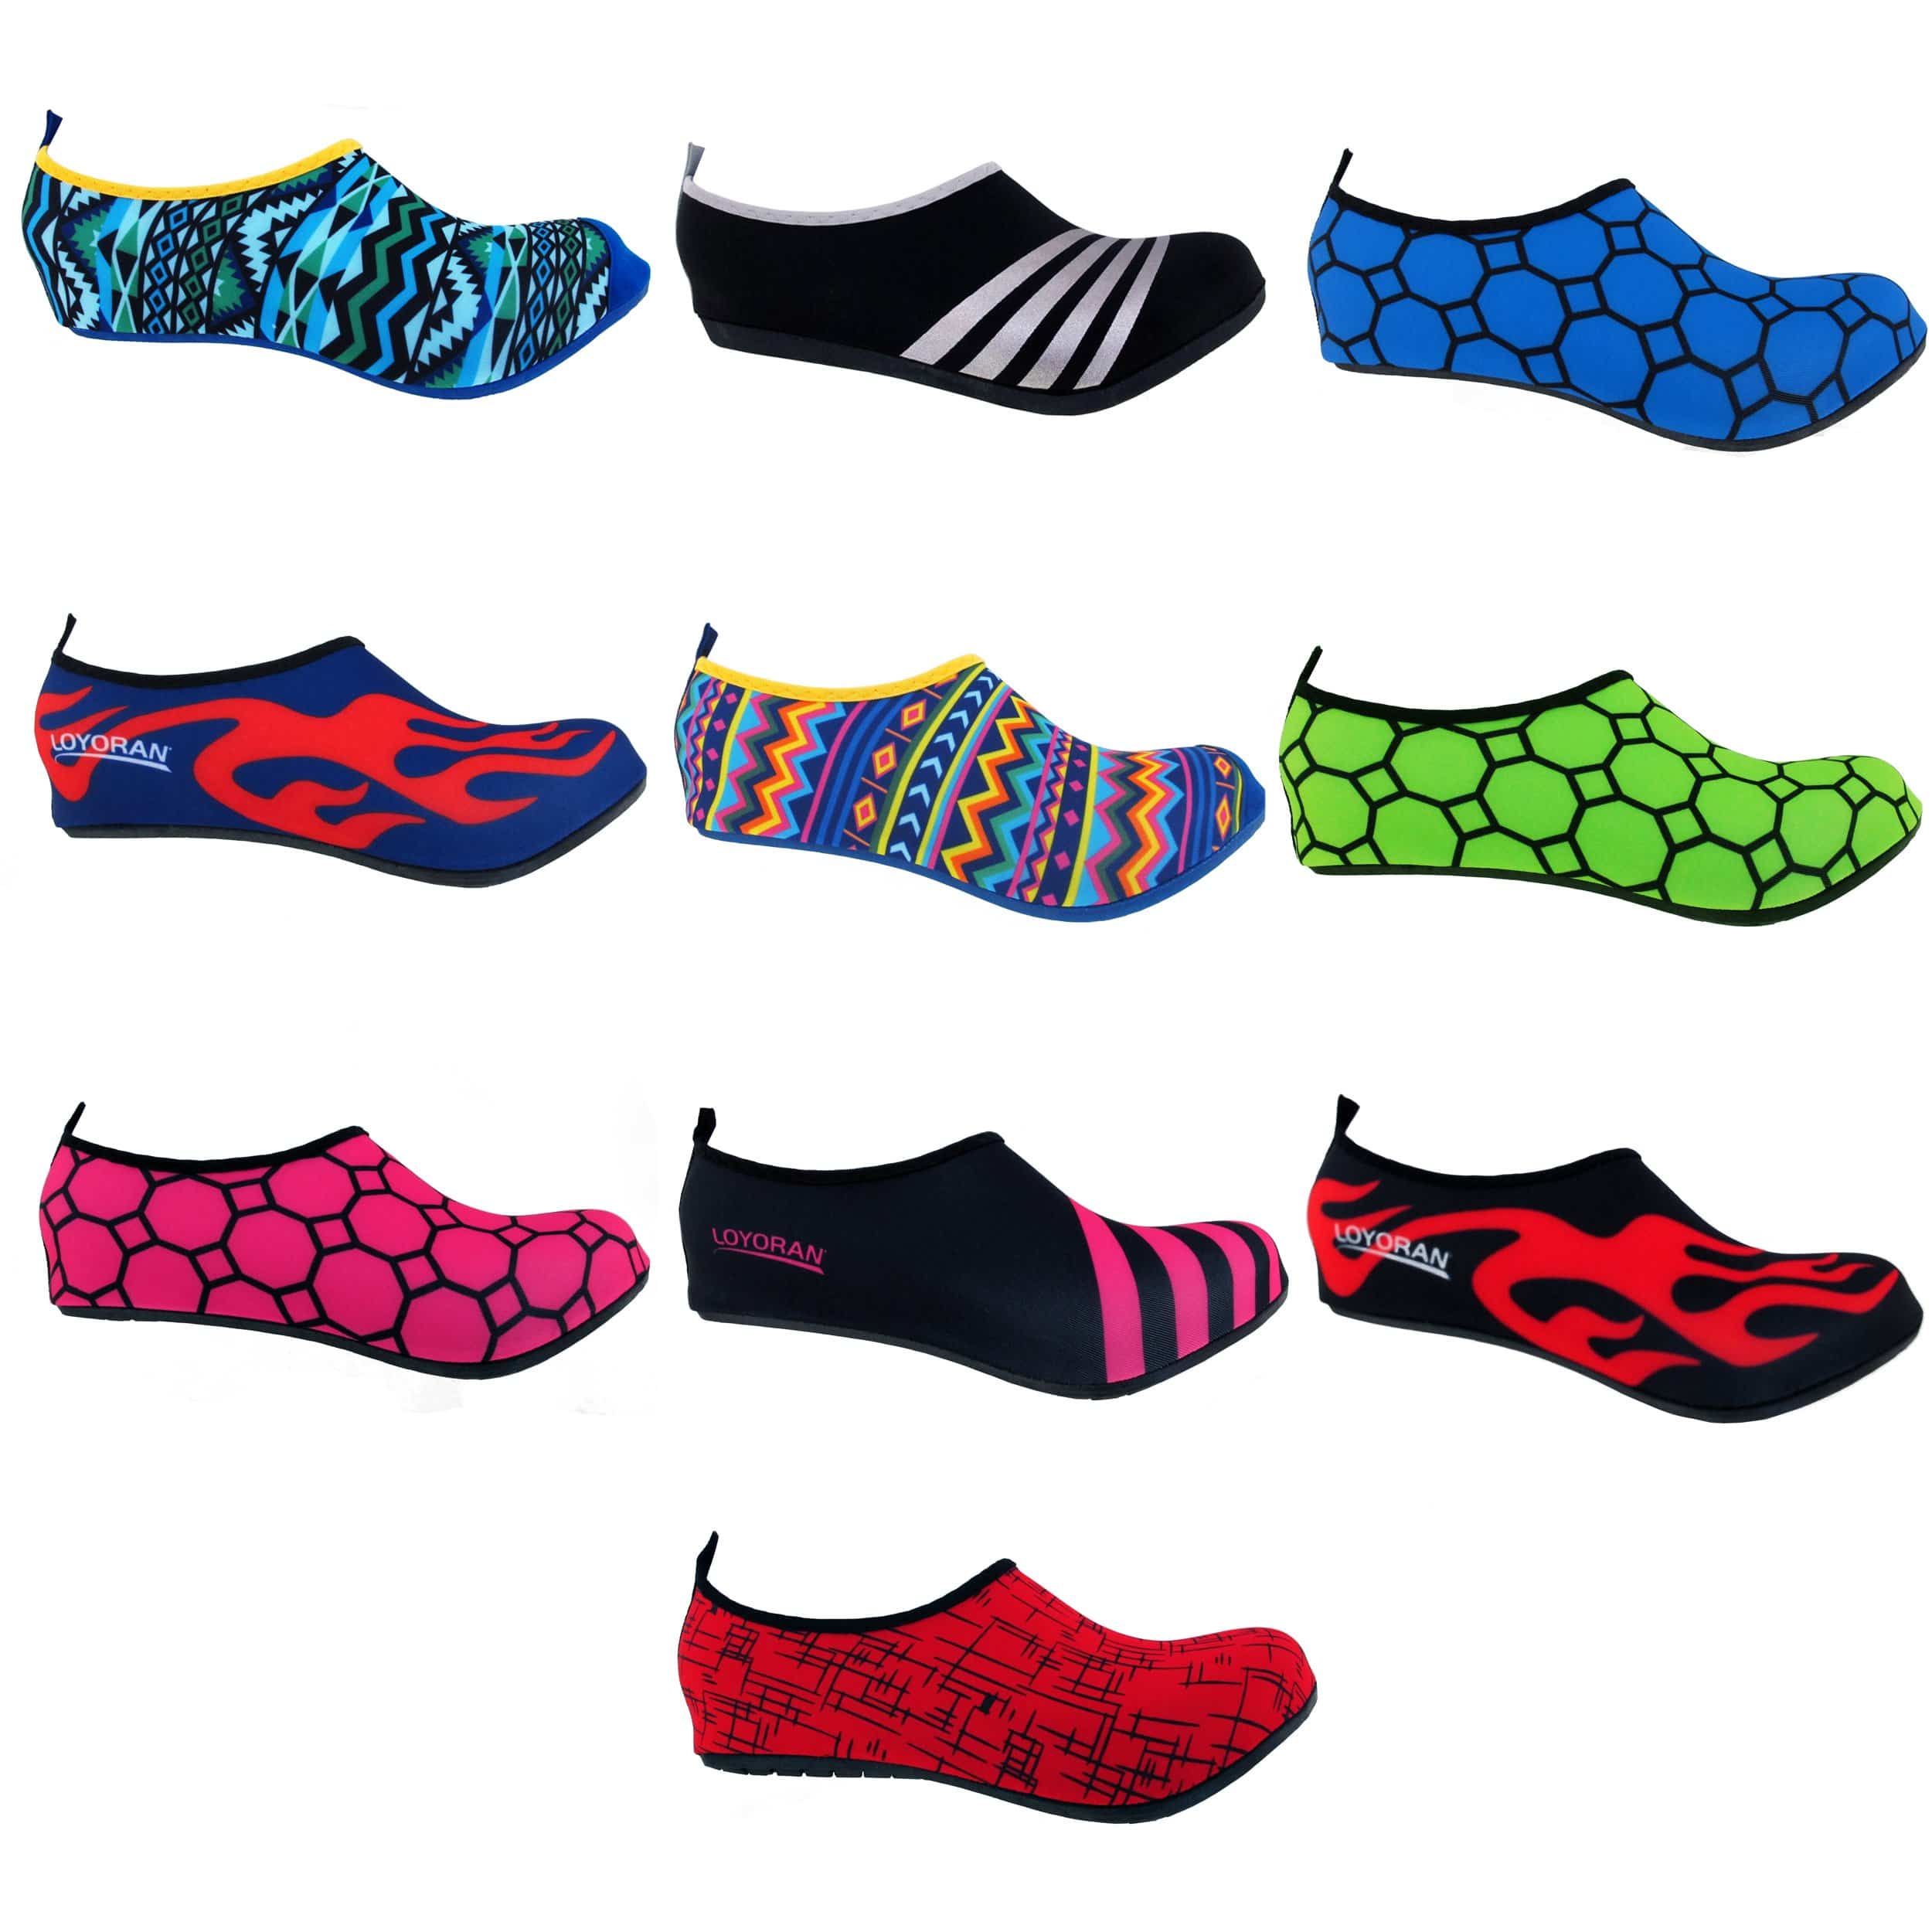 Water Shoes - Men's and Women's Beach Shoes for Sale